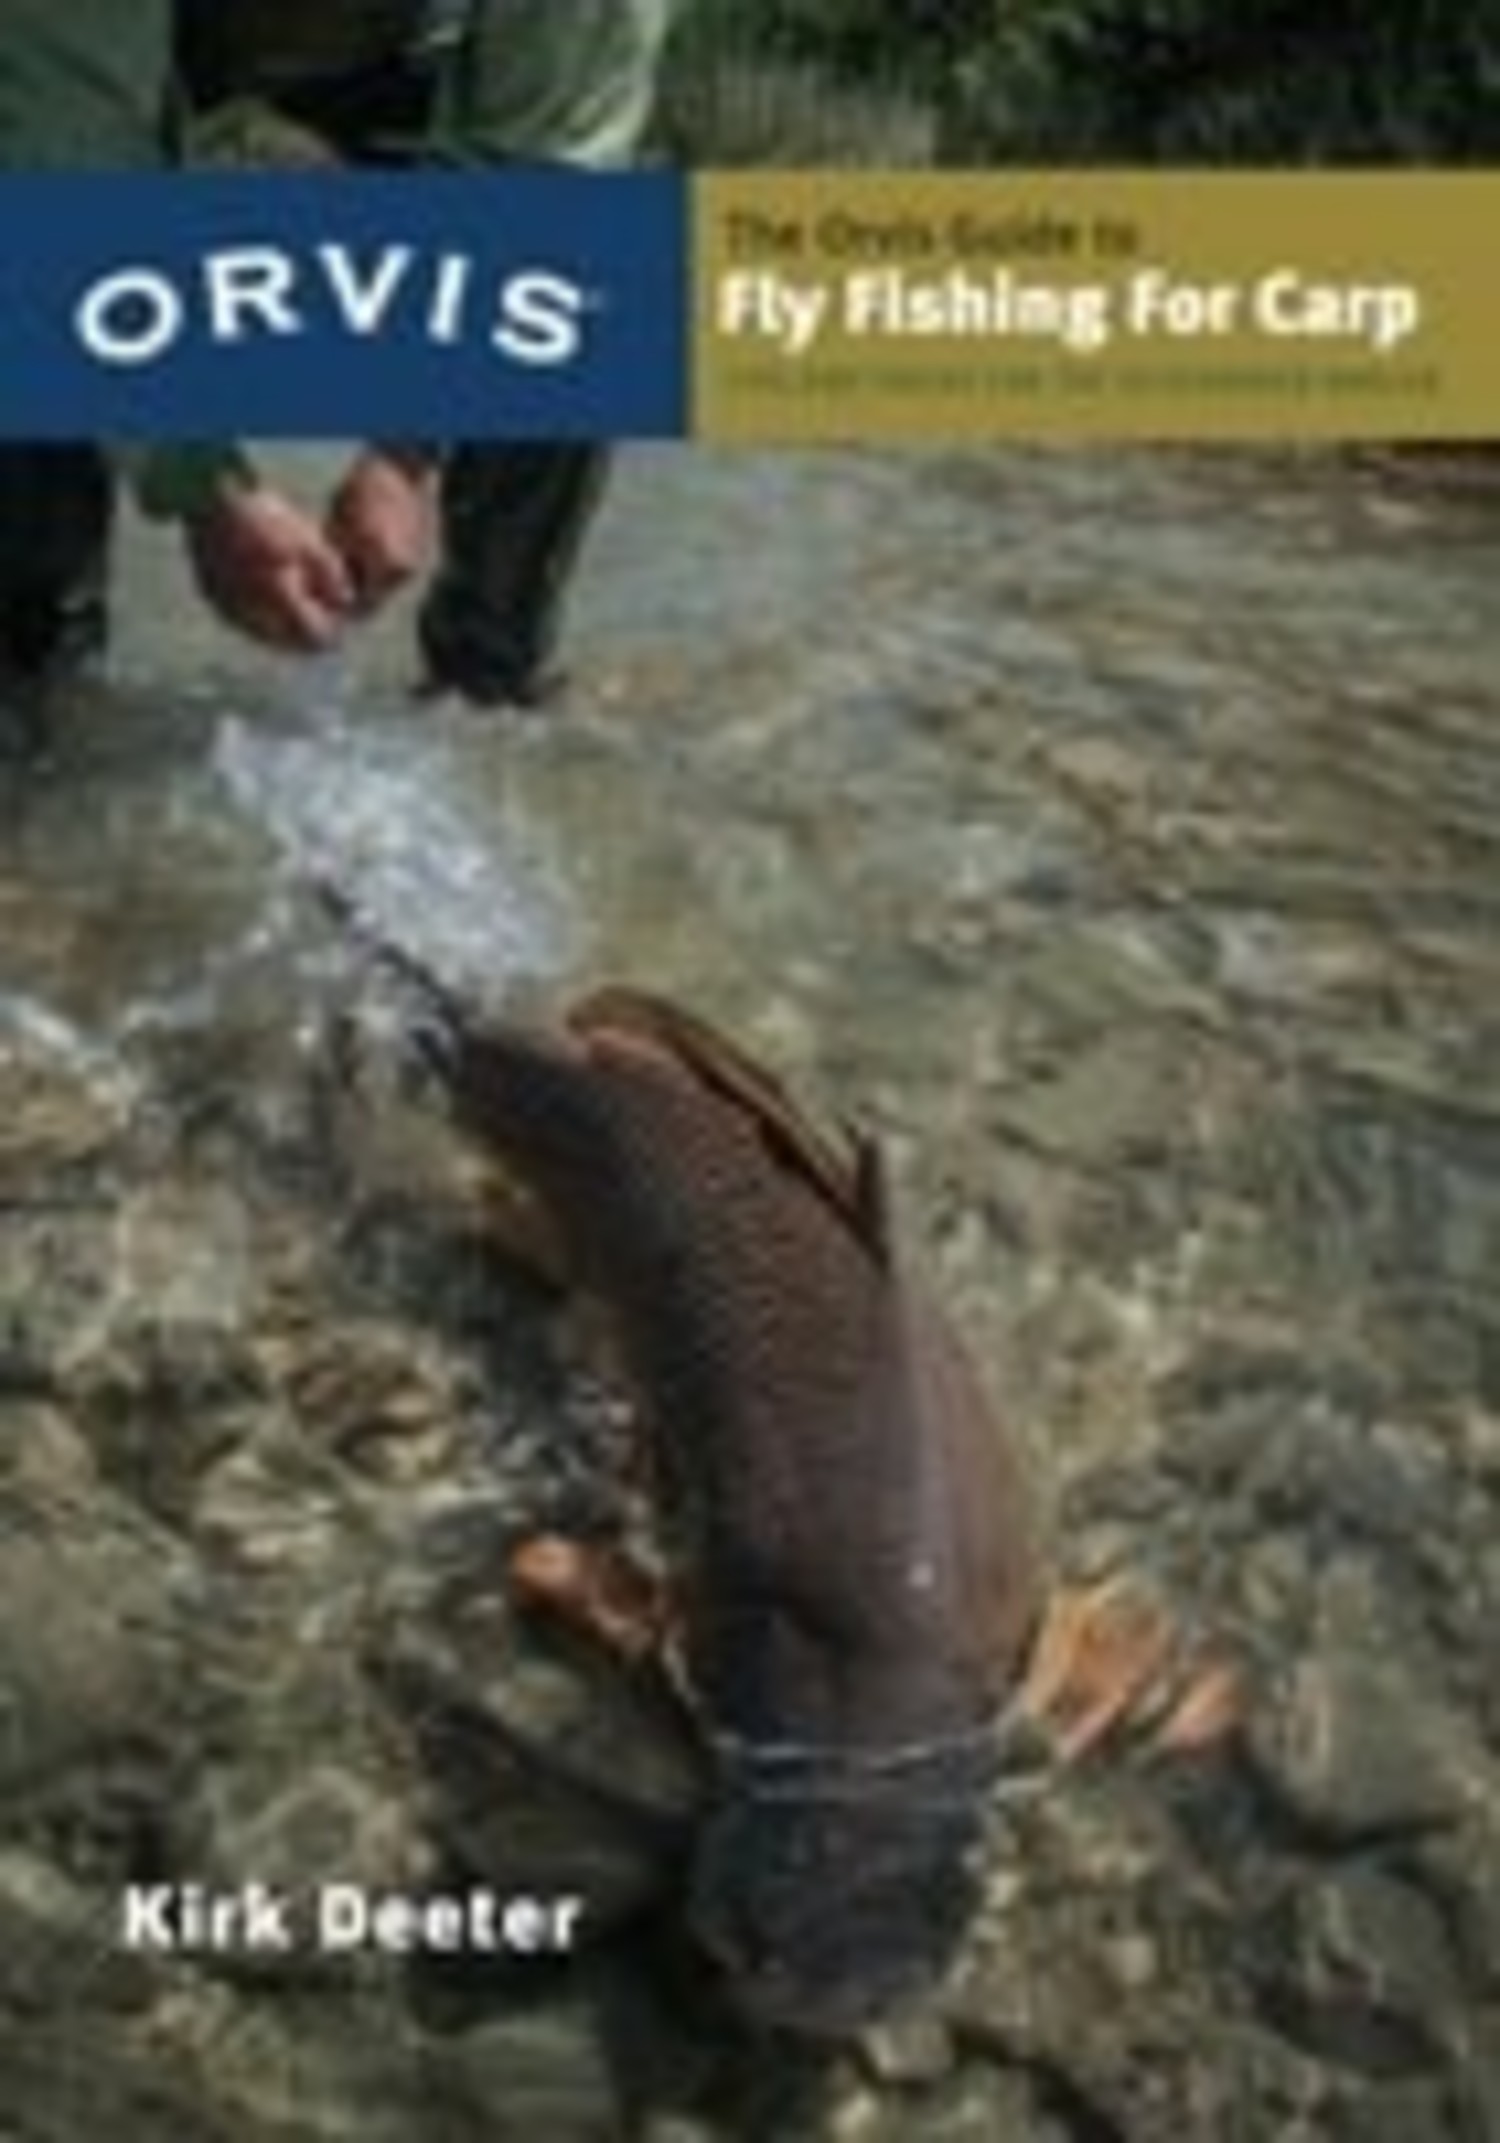 Orvis Guide to Fly Fishing For Carp - Royal Treatment Fly Fishing